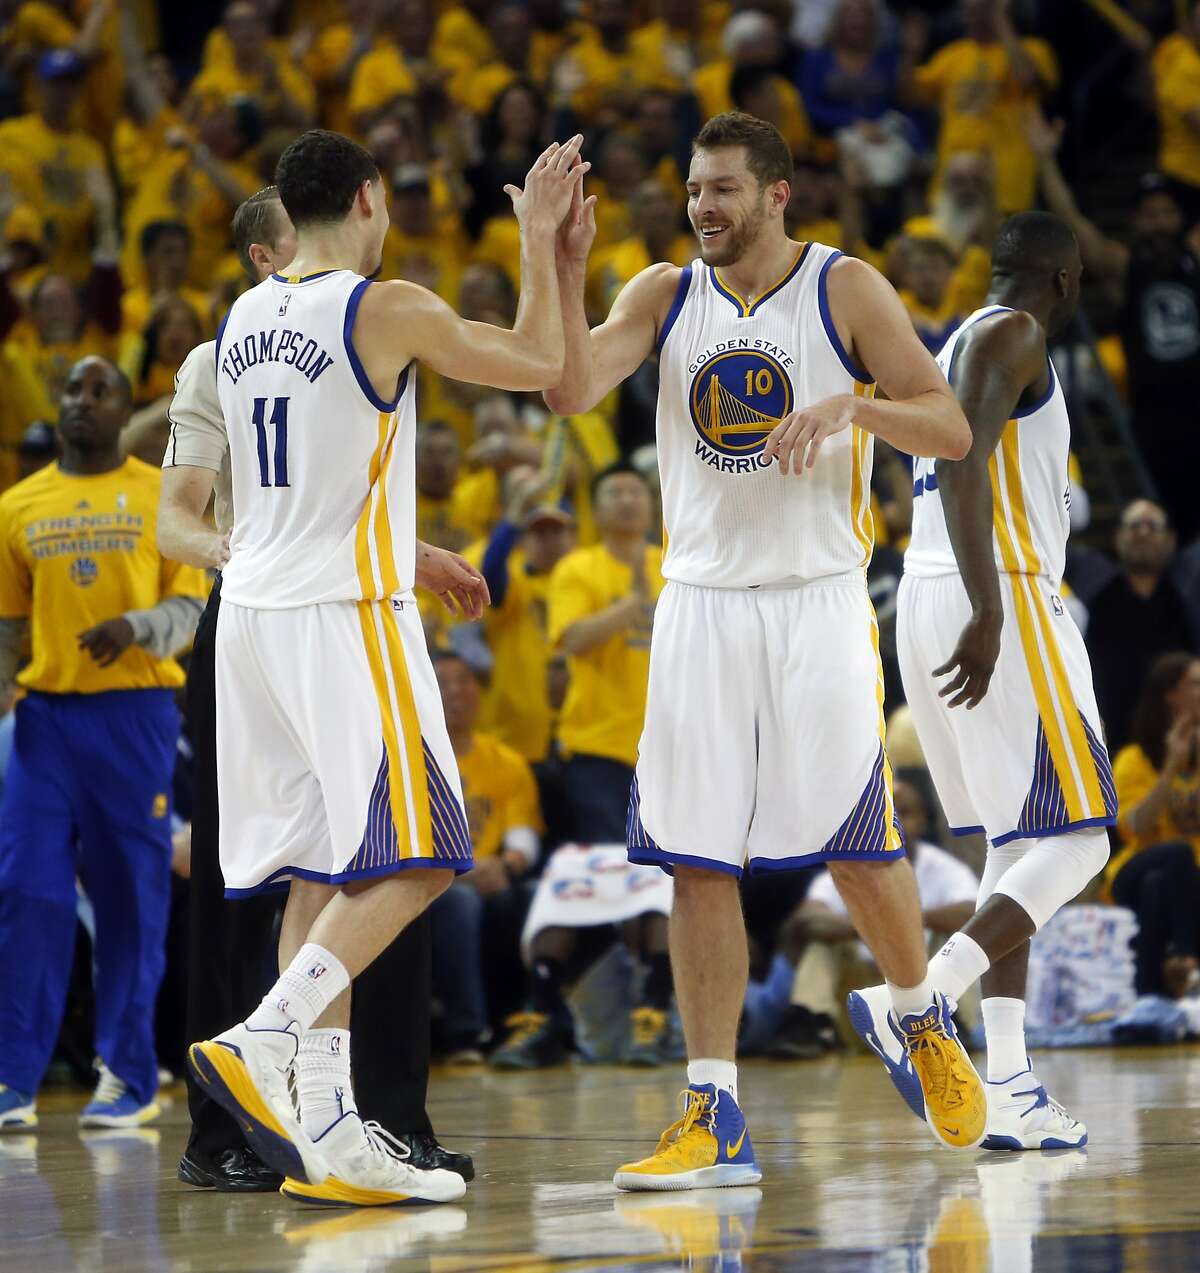 Golden State Warriors' David Lee and Klay Thompson celebrate in 4th quarter during 98-78 win over Memphis Grizzlies during Game 5 of NBA Playoffs' Western Conference Semifinals at Oracle Arena in Oakland, Calif., on Wednesday, May 13, 2015.